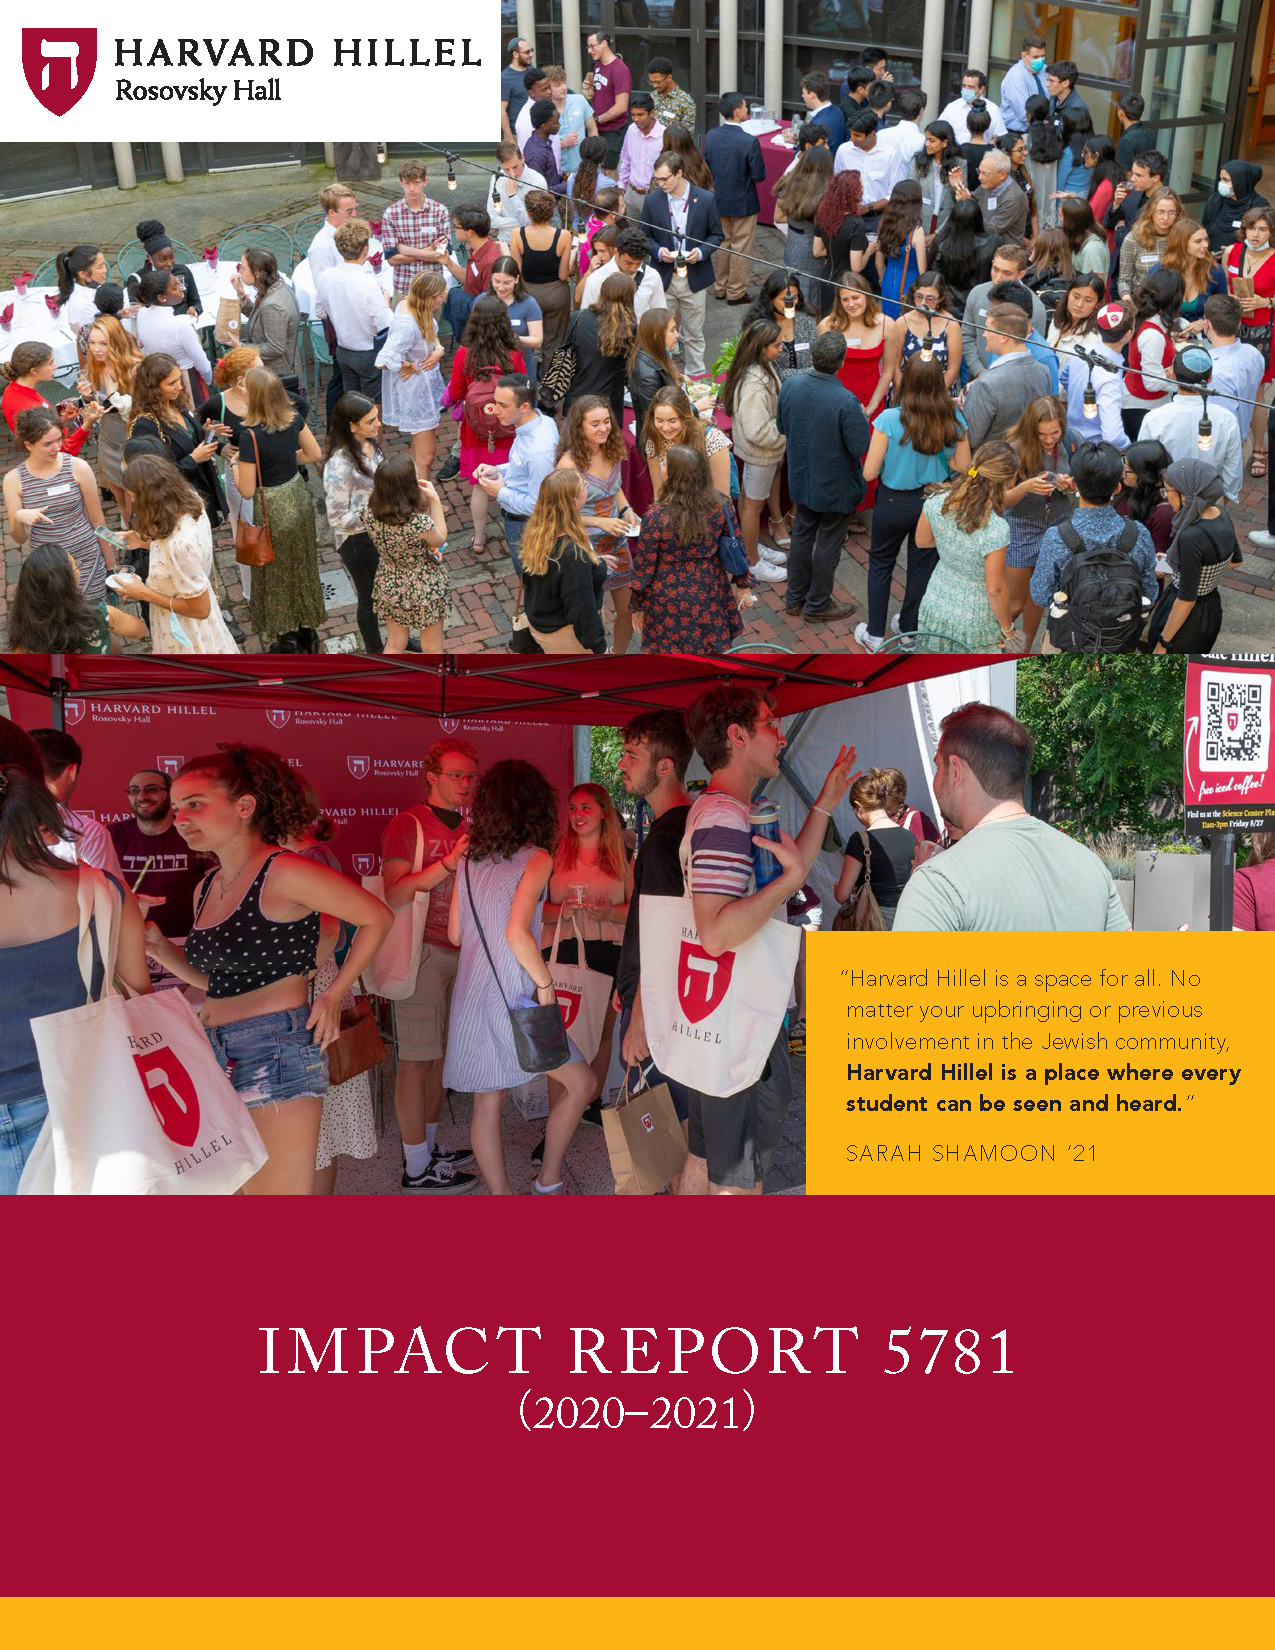 Harvard Hillel Impact Report 5781 (2020-2021) - Page 1